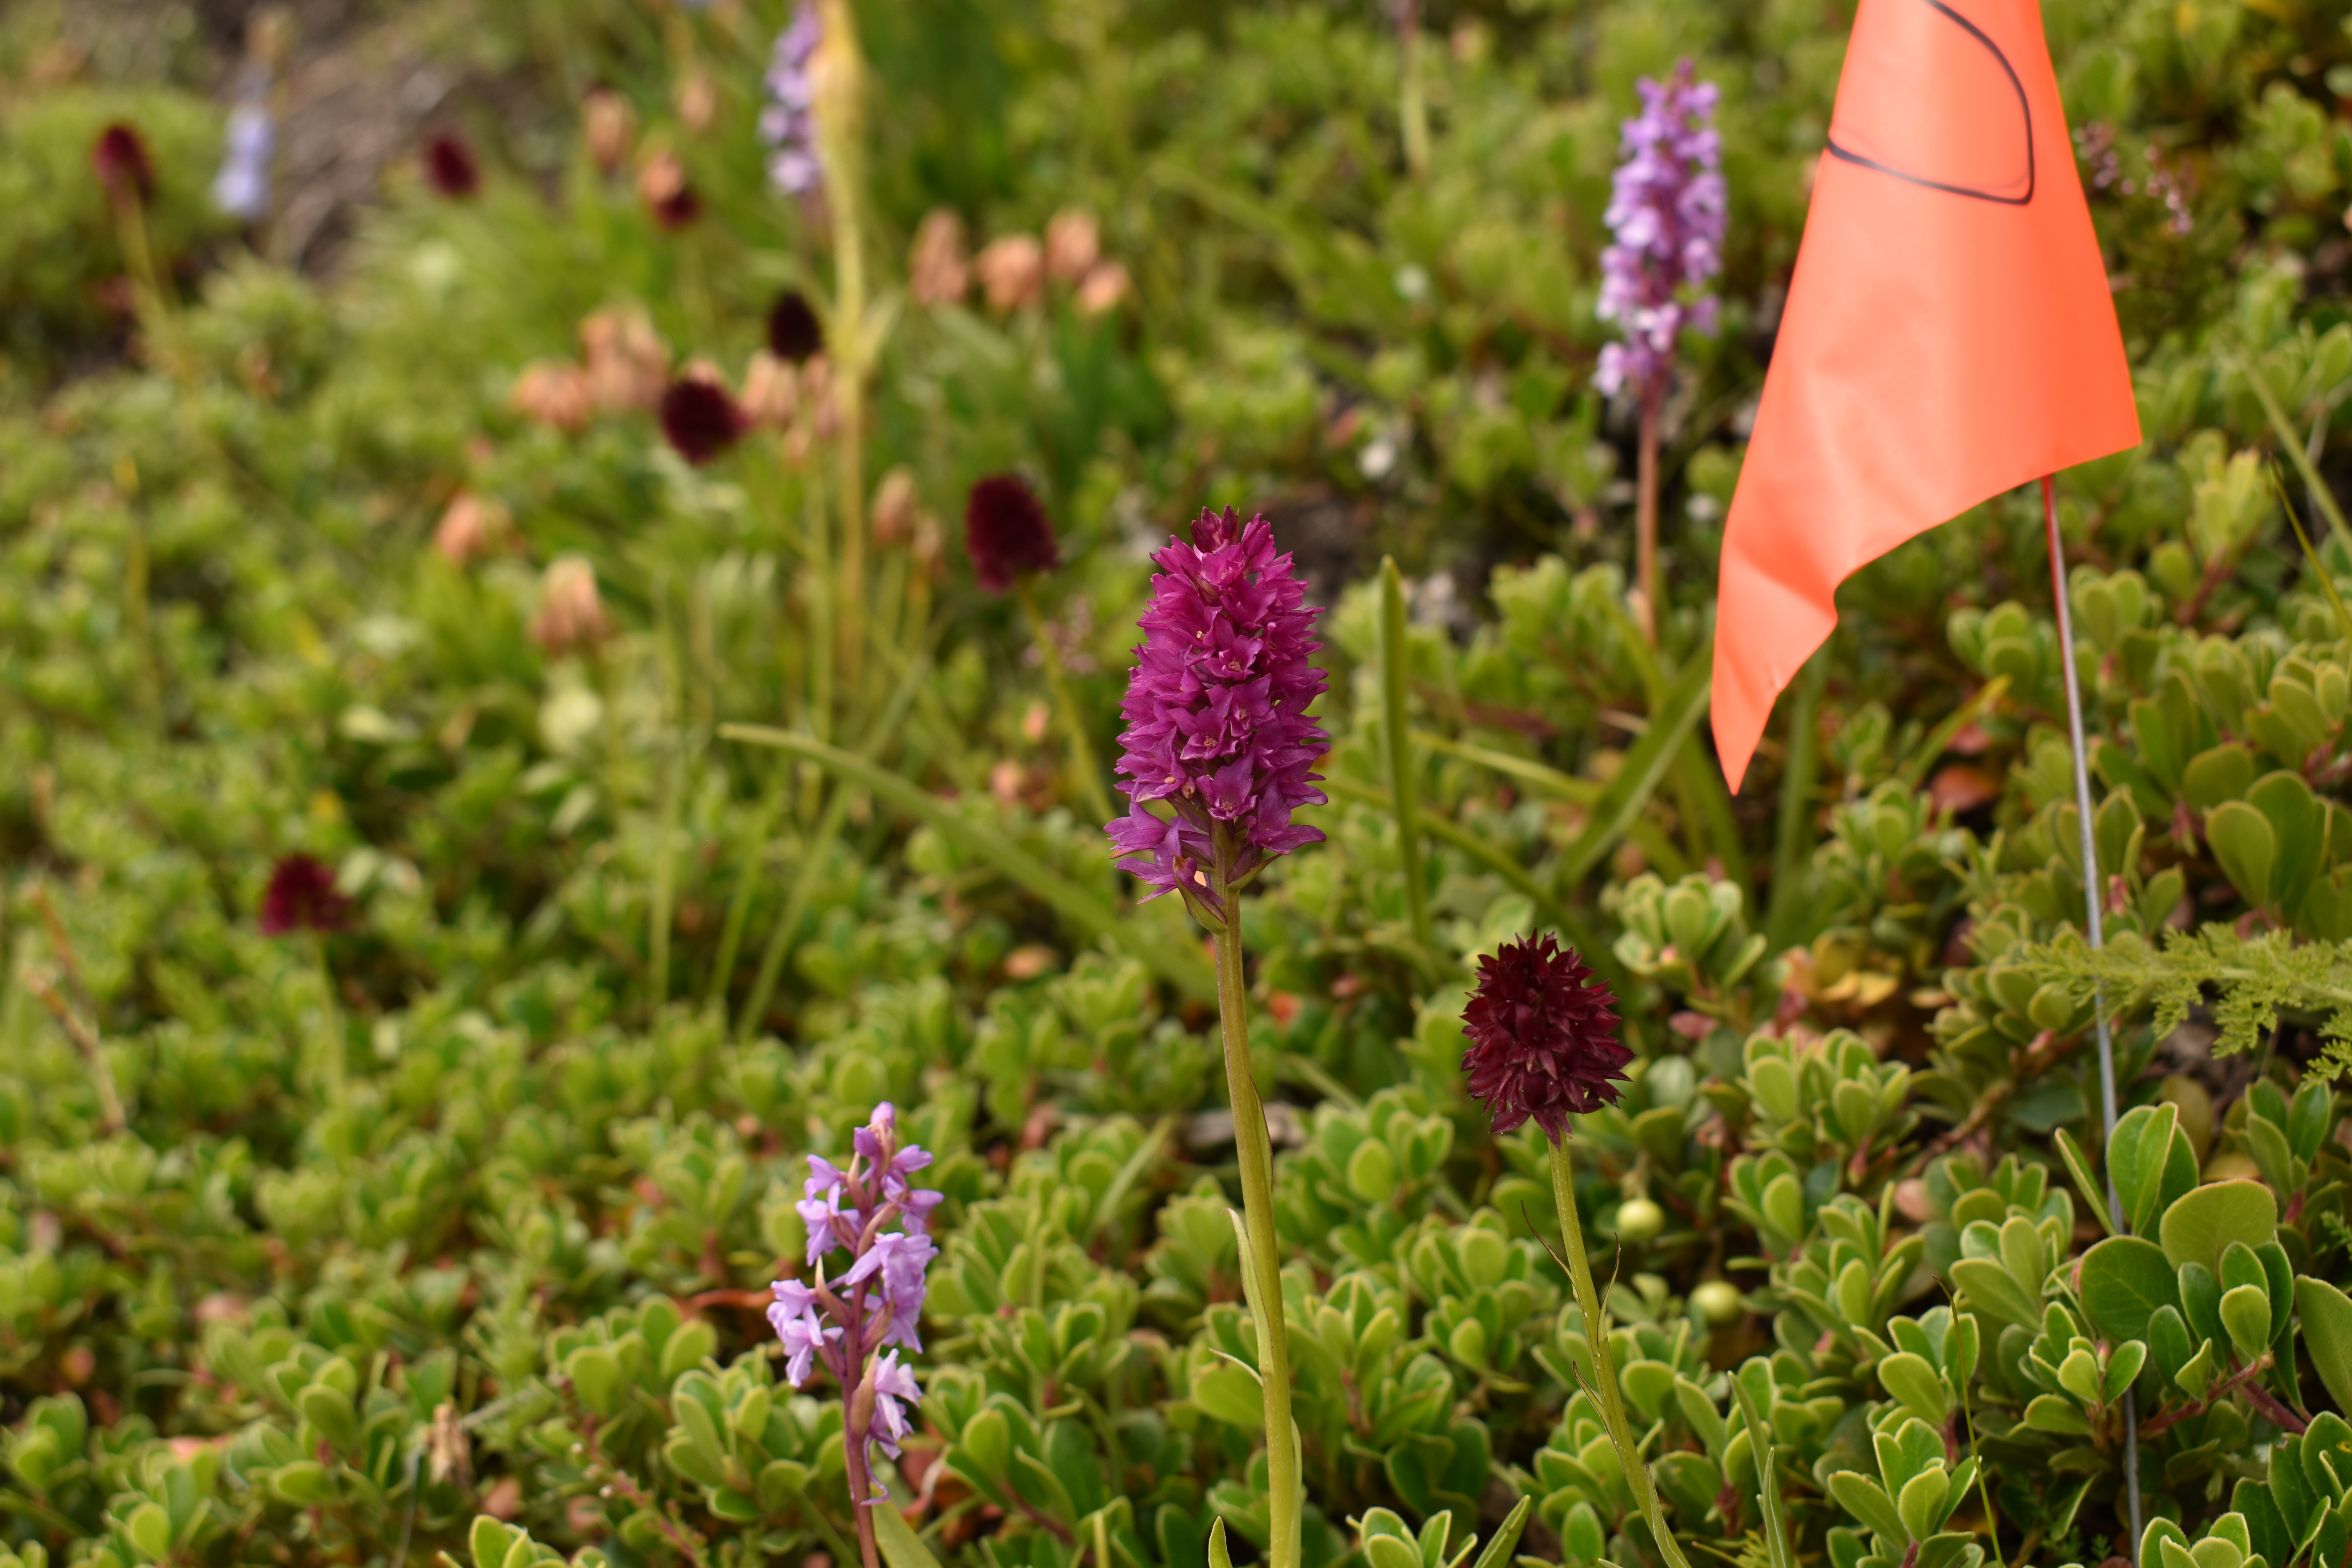 A photo of Gymnadenia conopsea (pale lilac orchid), G. rhellicani (dark red orchid), and their hybrid (magenta orchid) in front of vegetation with an orange flag on the right side.